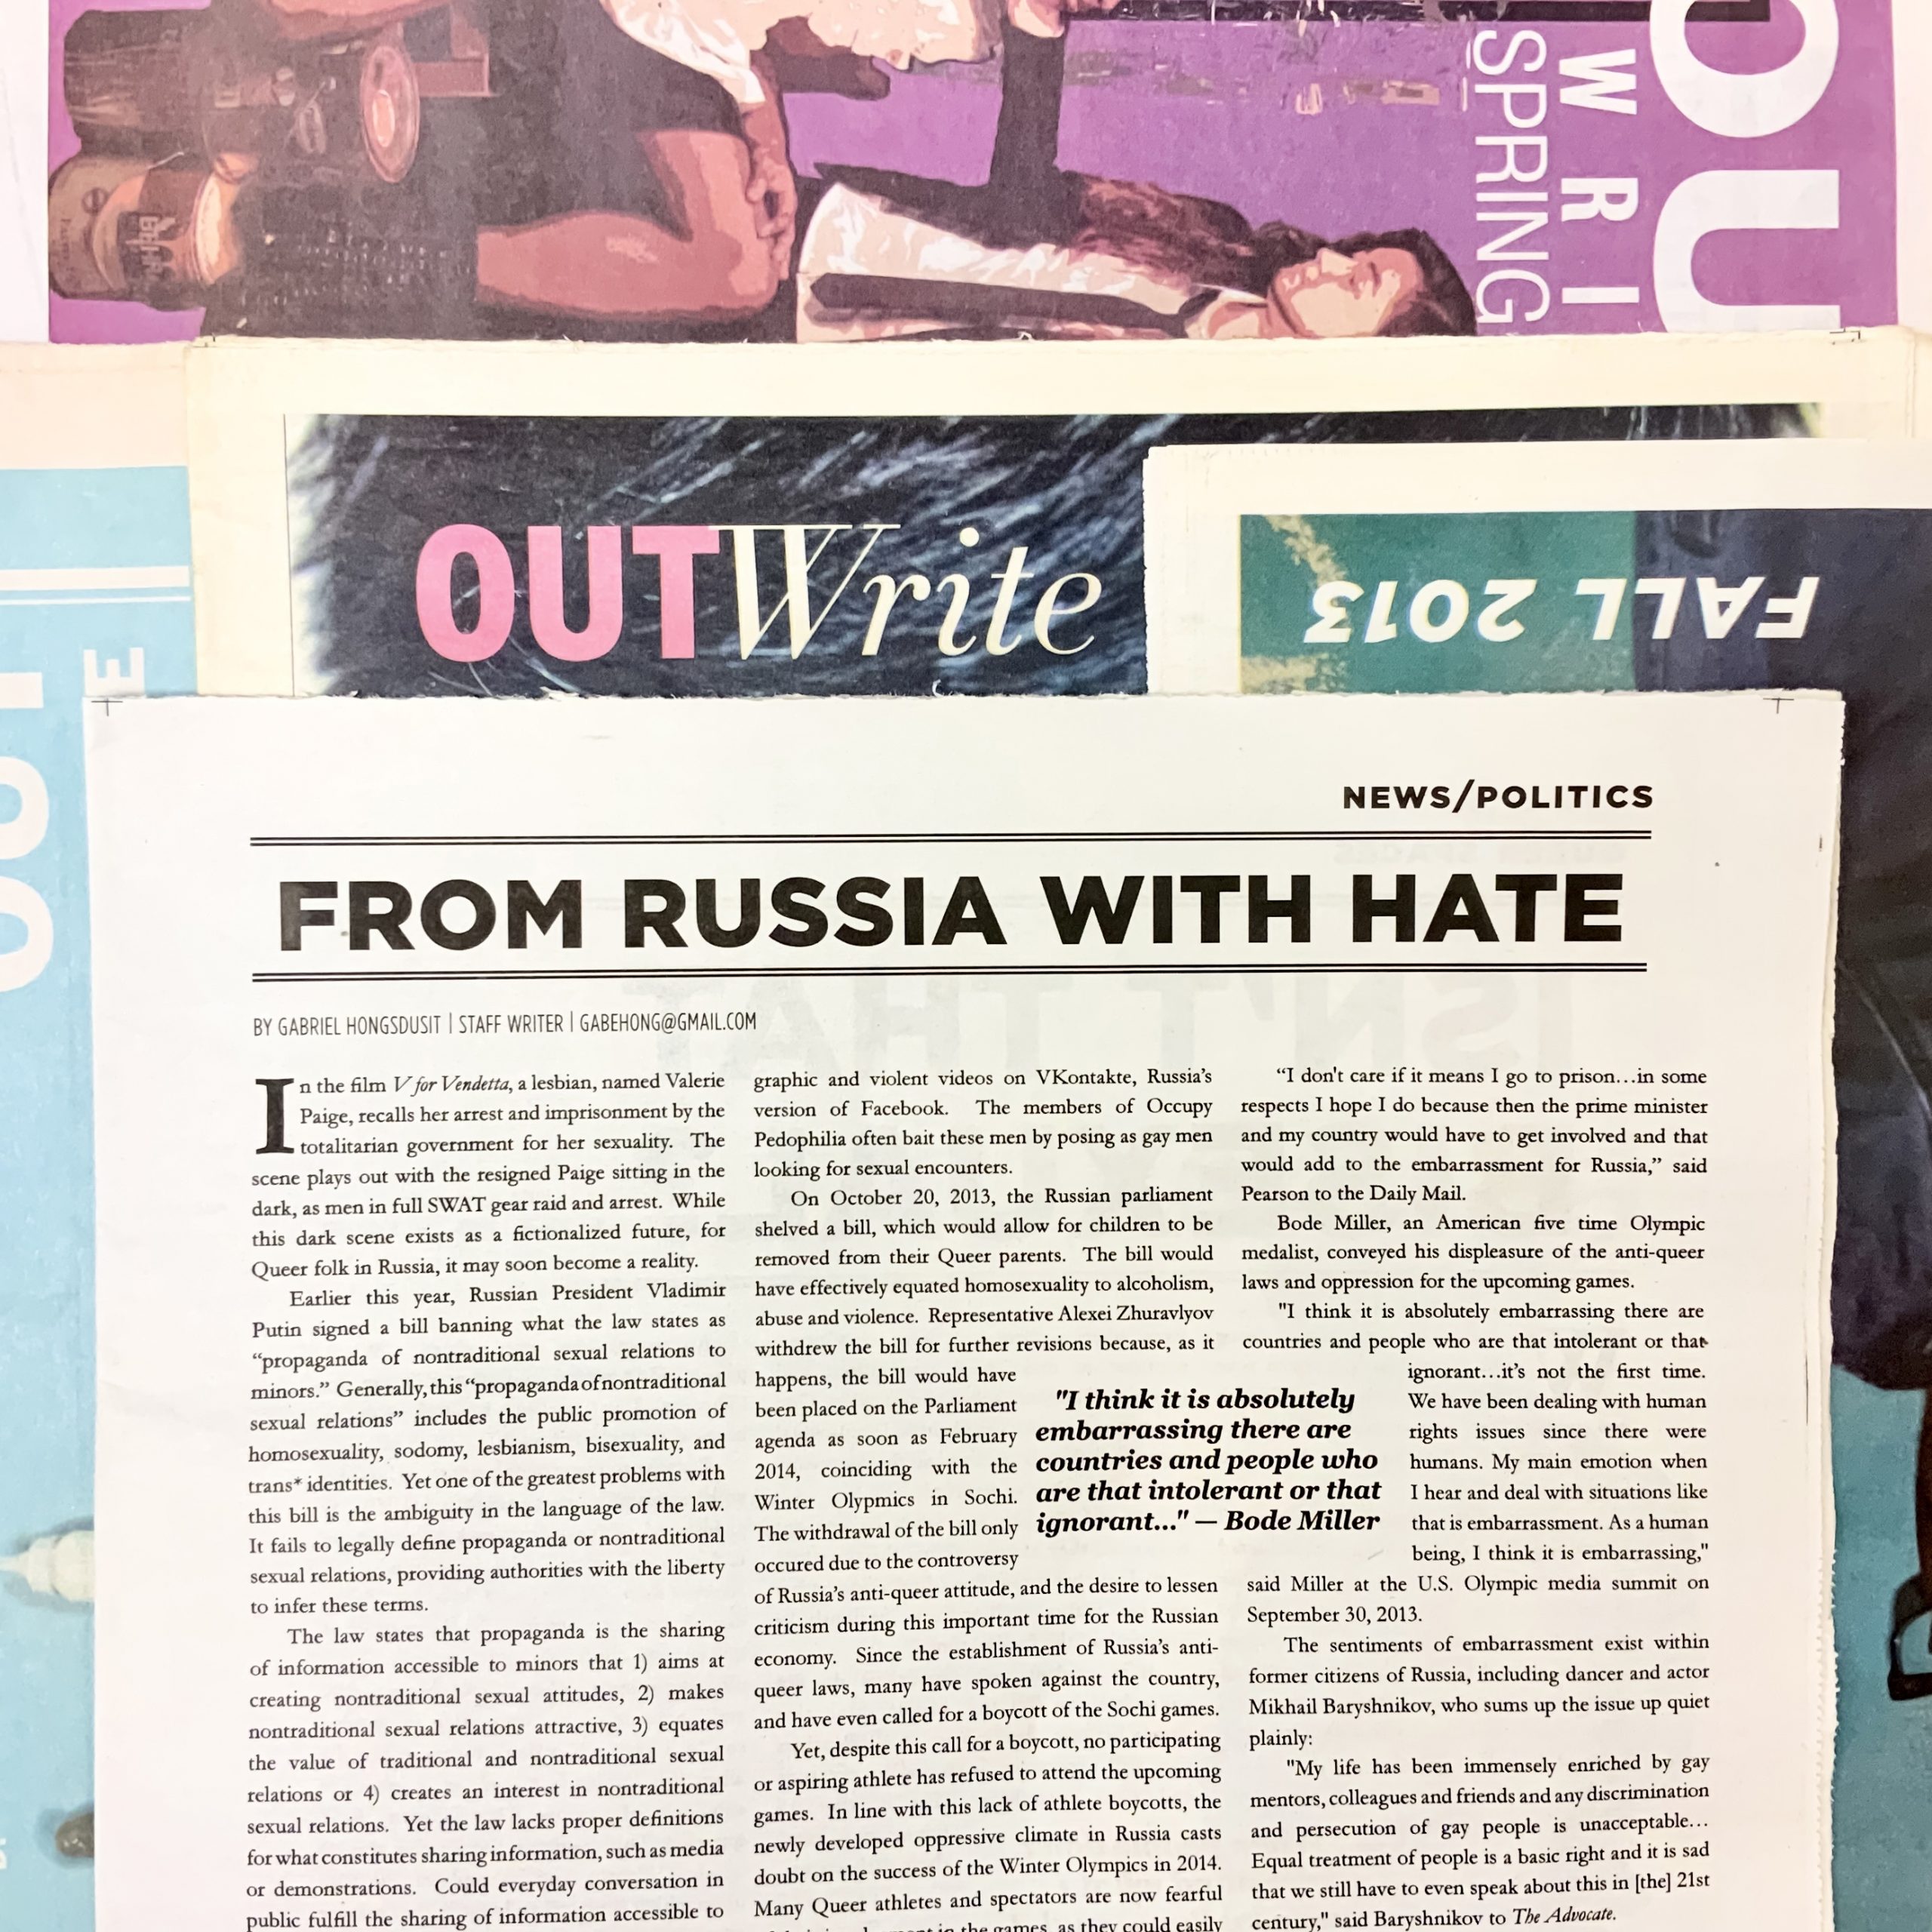 photo of outwrite fall 2013 article titled "from russia with hate"